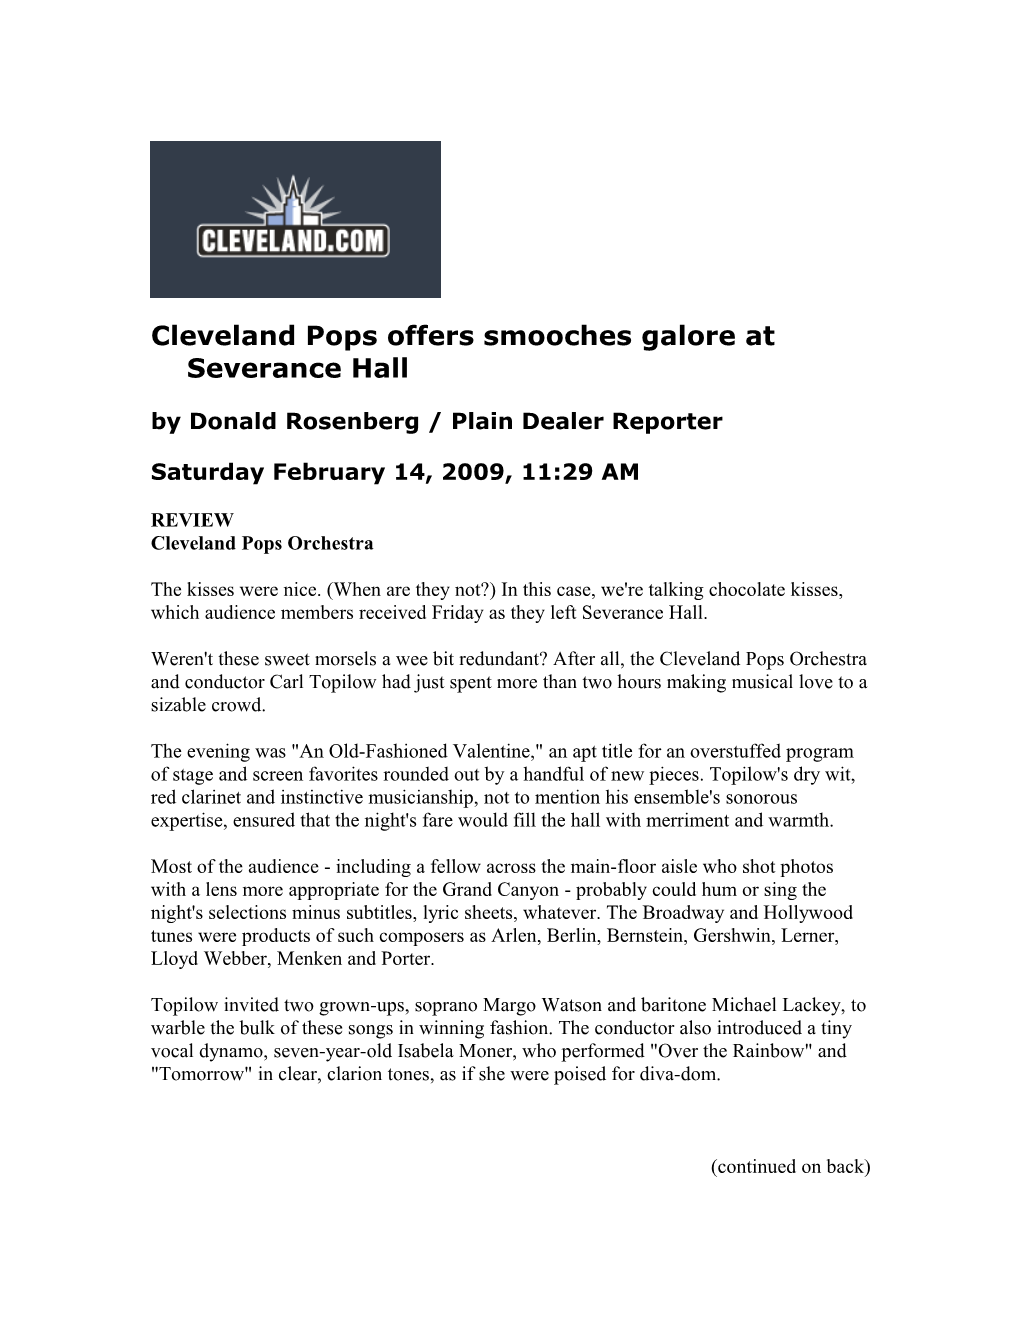 Cleveland Pops Offers Smooches Galore at Severance Hall